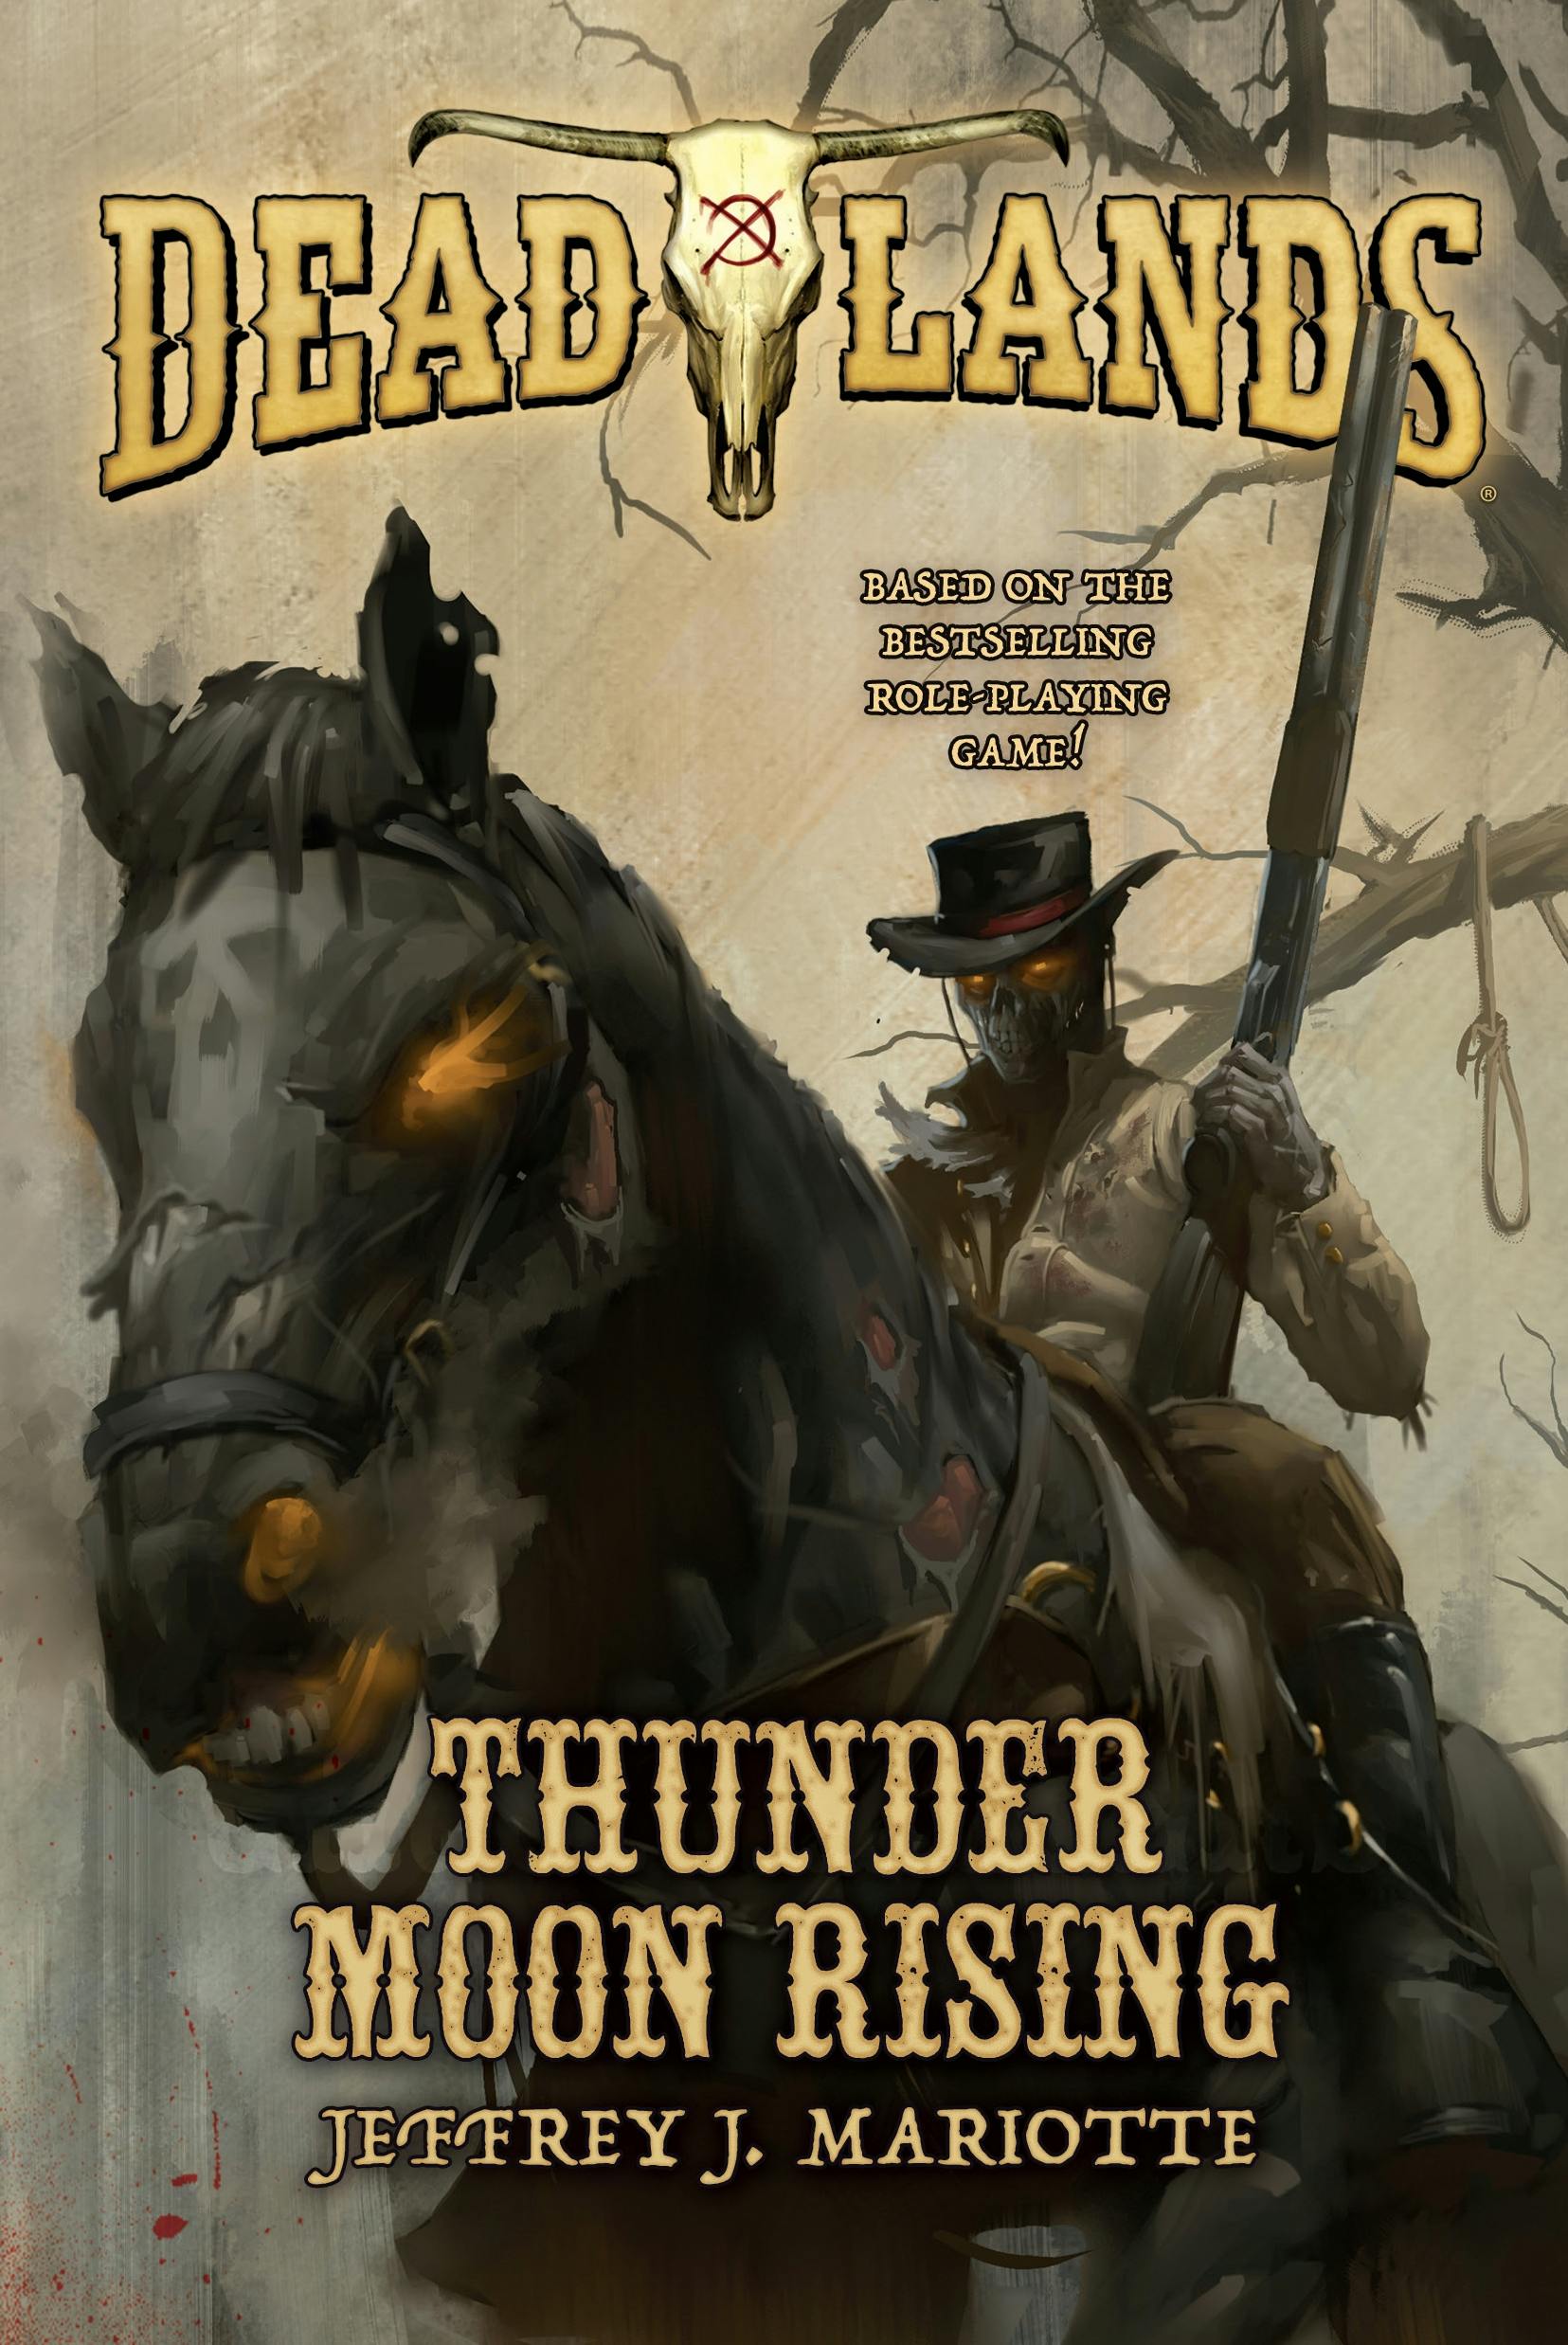 Cover for the book titled as: Deadlands: Thunder Moon Rising